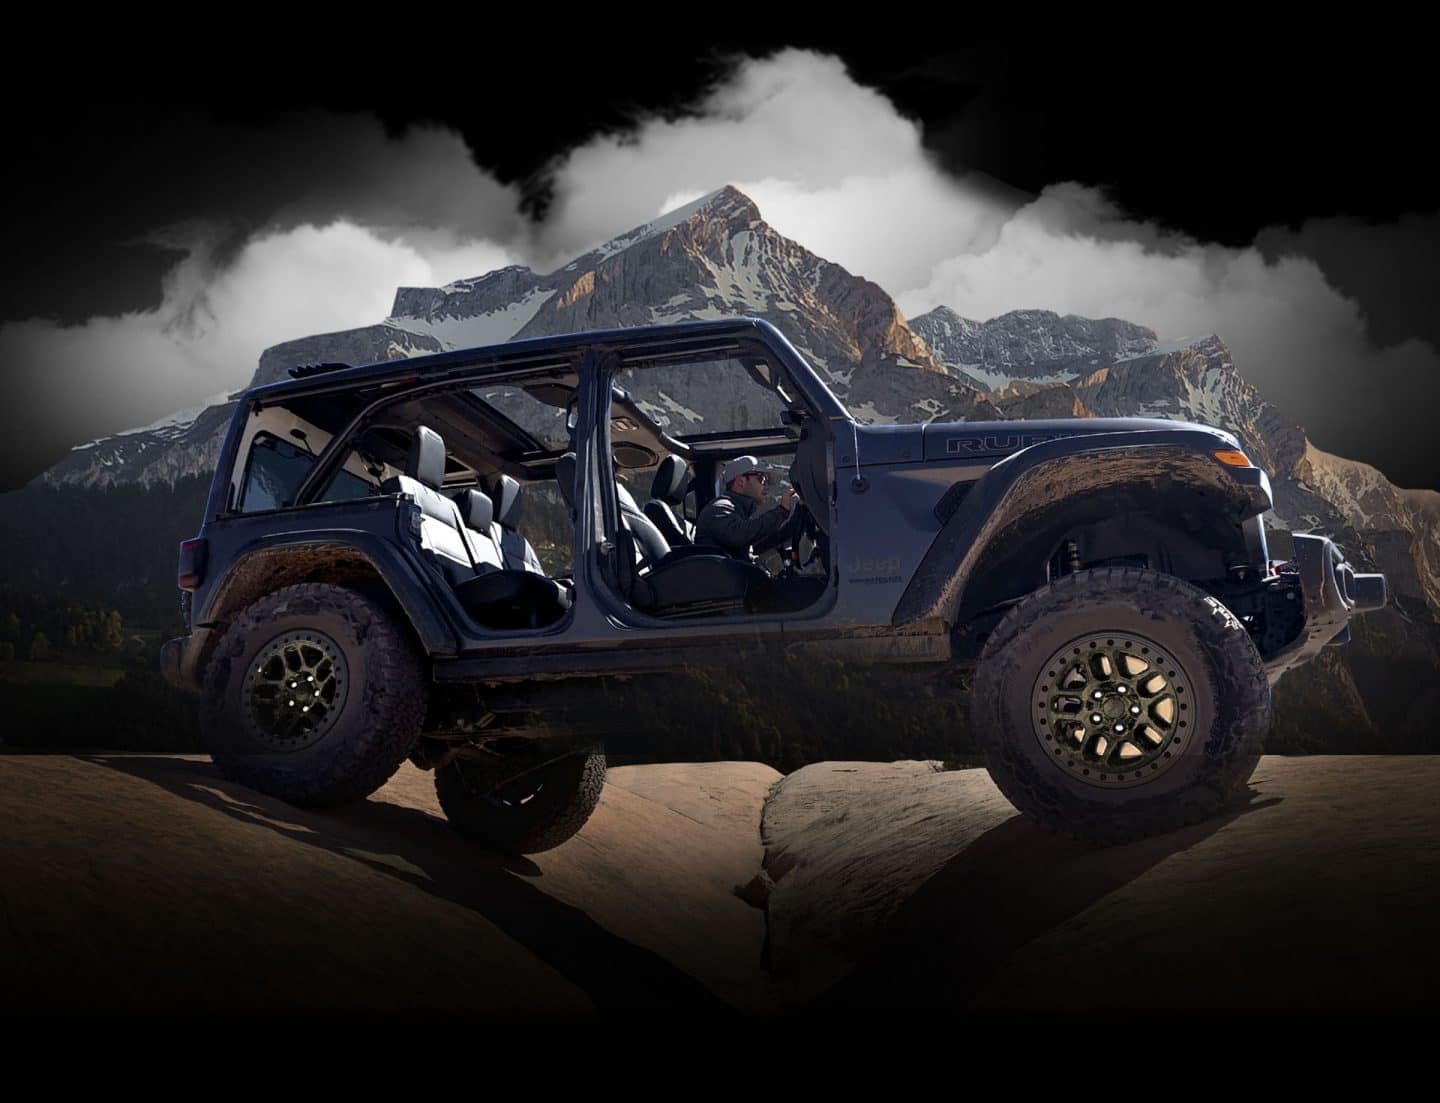 The 2023 Jeep Wrangler Rubicon 392 with Xtreme Recon Package straddling two boulders as it's driven off-road with its doors off and top open.